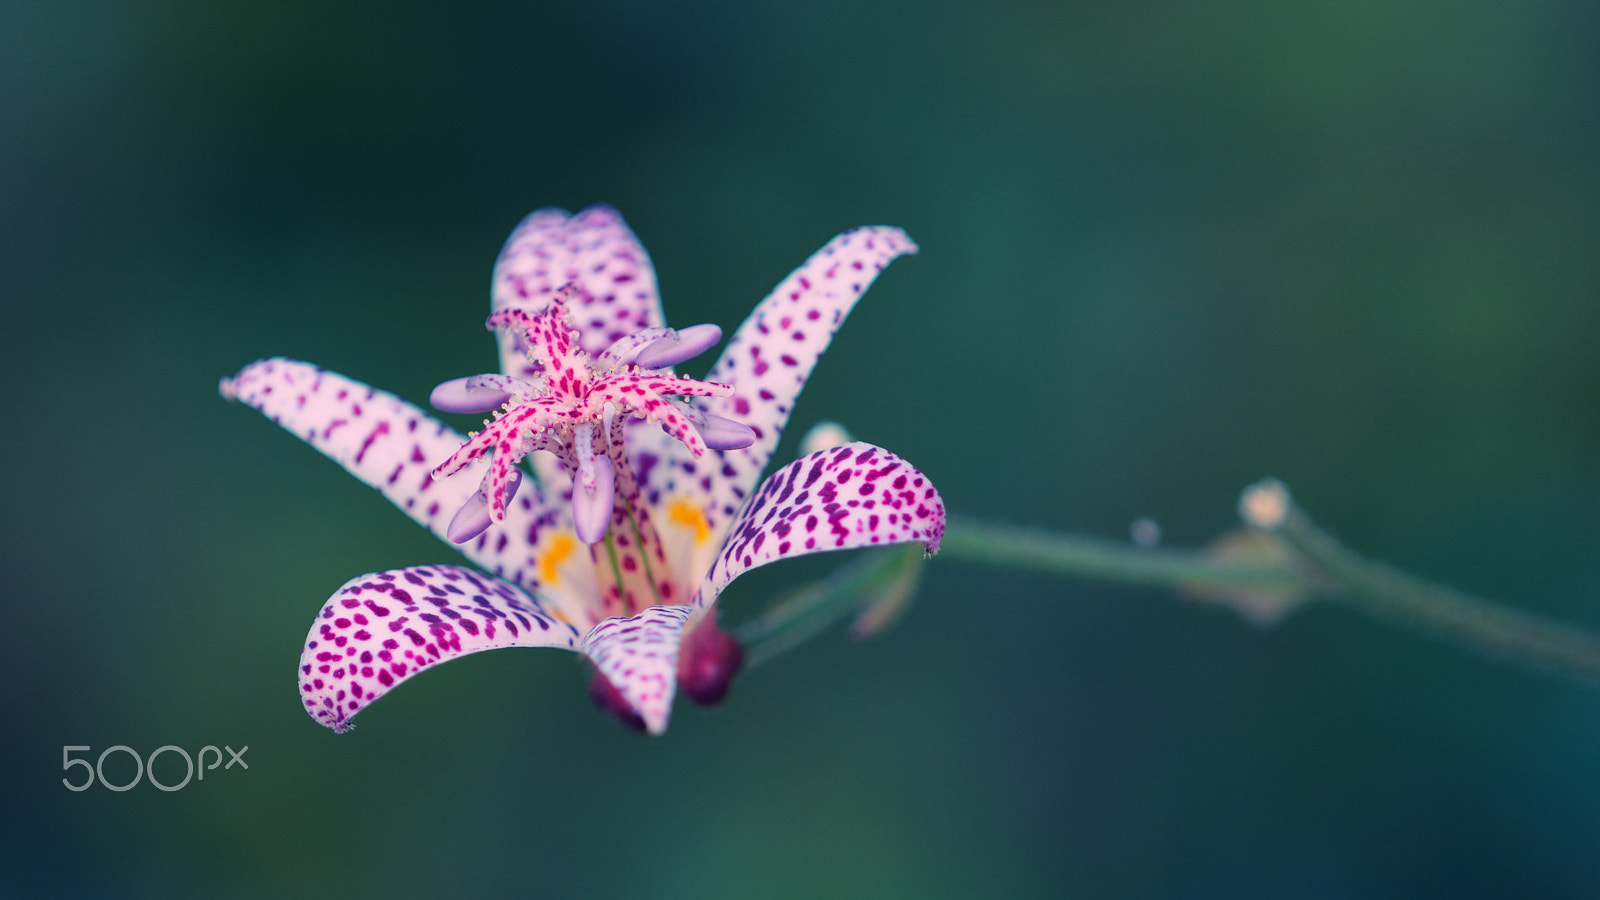 Nikon D7100 sample photo. Hairy toad lily photography